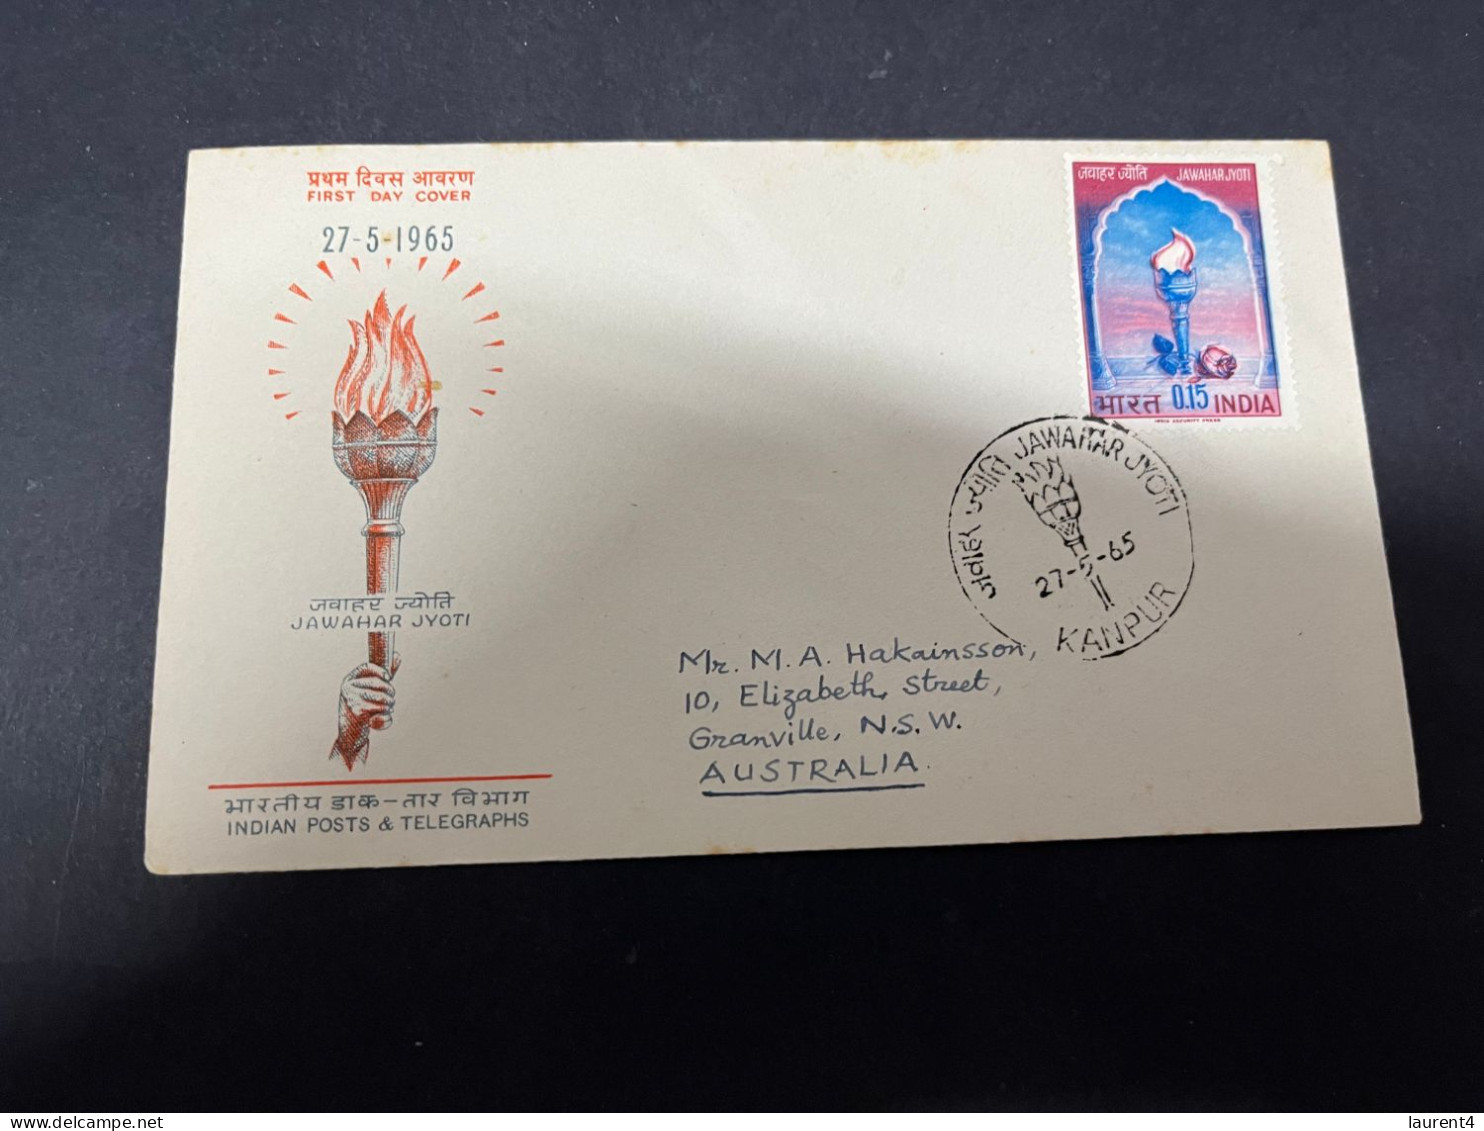 12-5-2024 (4 Z 49) INDIA FDC Cover - 1965 - Jawahar Jyoti (posted) - FDC